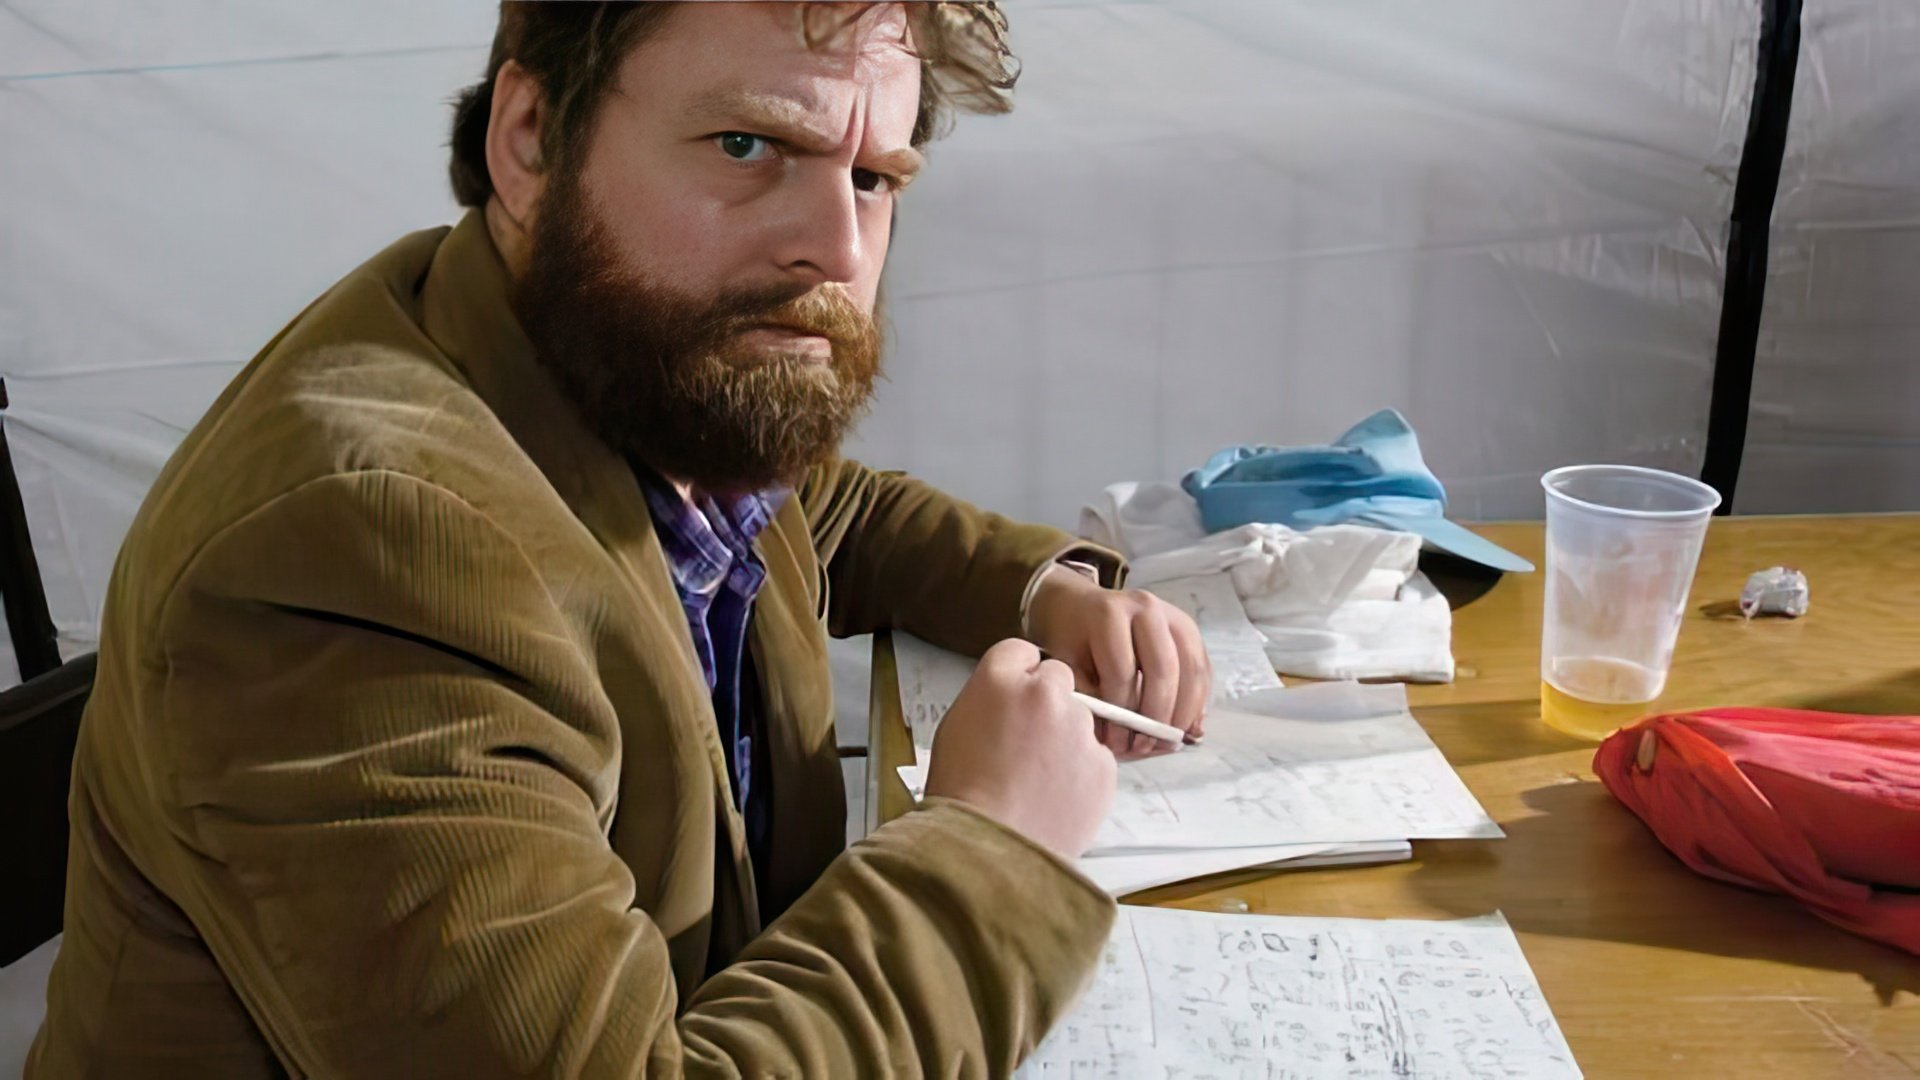 Zach Galifianakis: the Comedian at Work